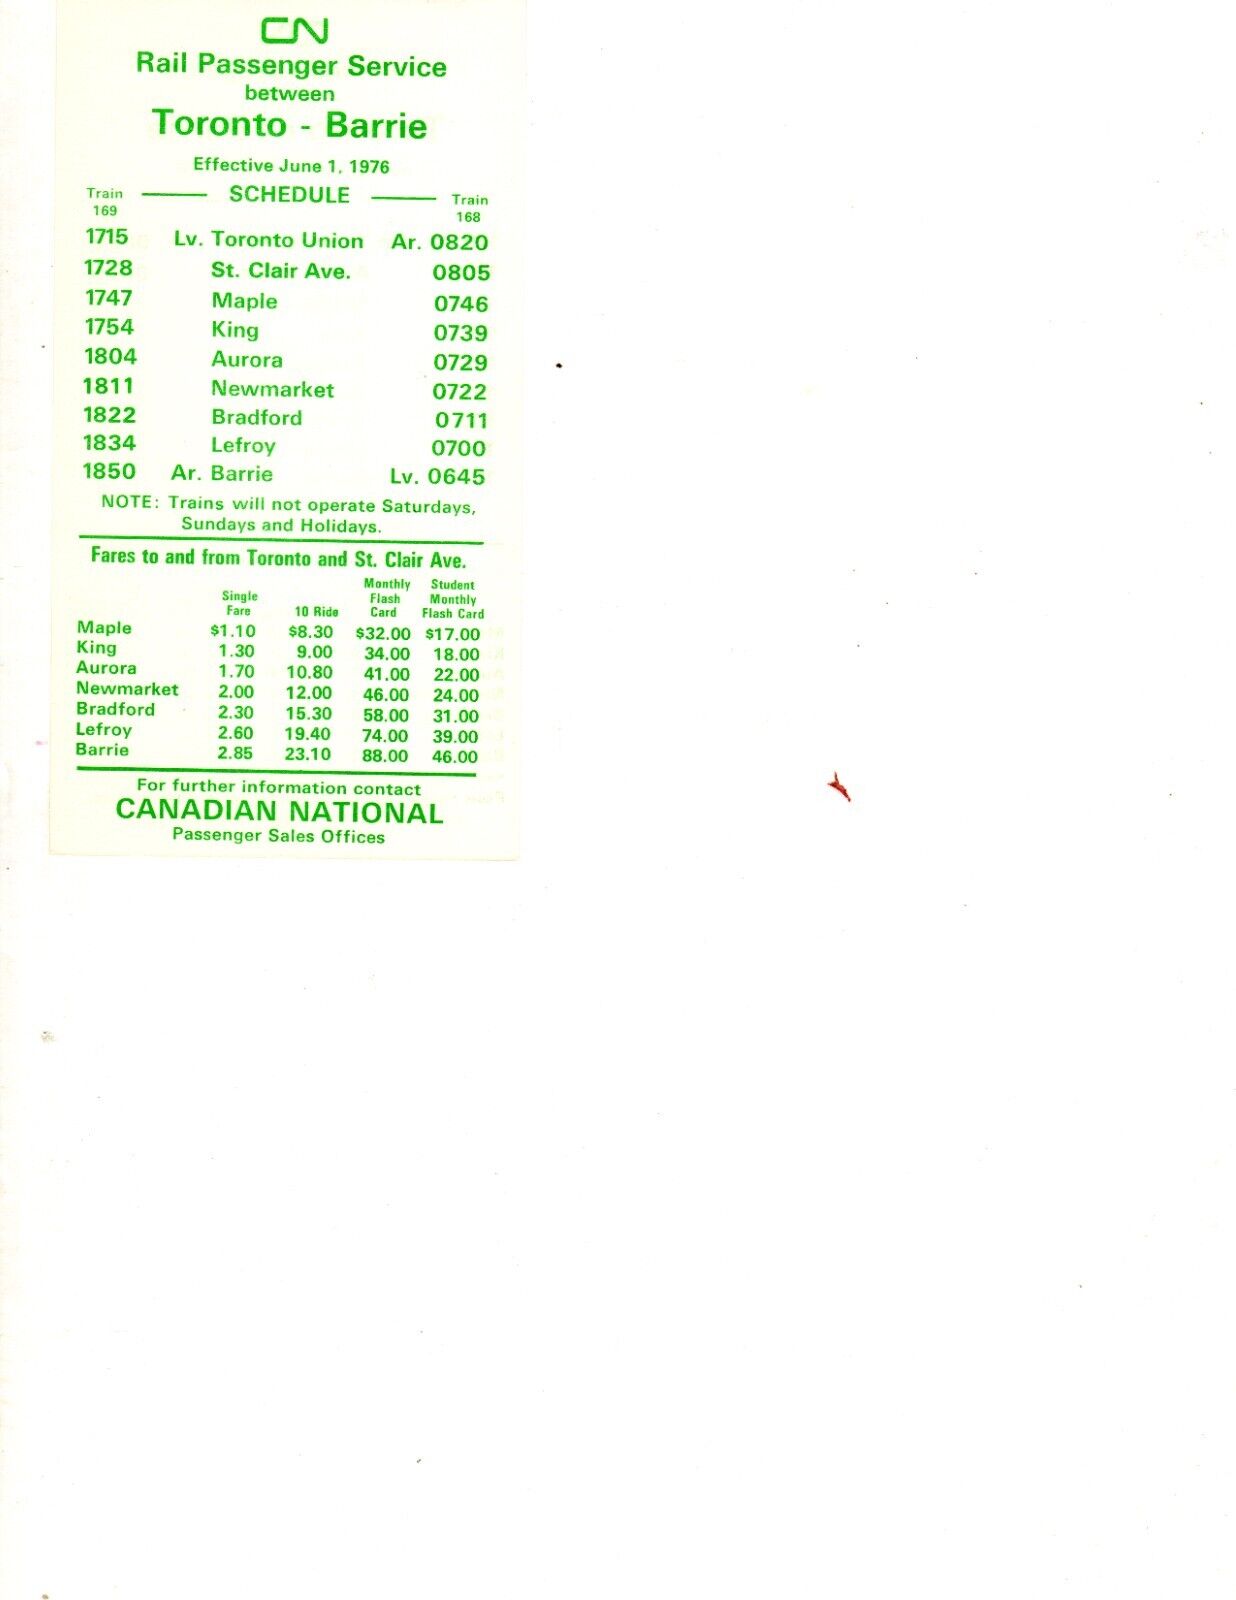 CANADIAN NATIONAL RY - TORONTO TO BARRIE SCHEDULE - 6/1/1976